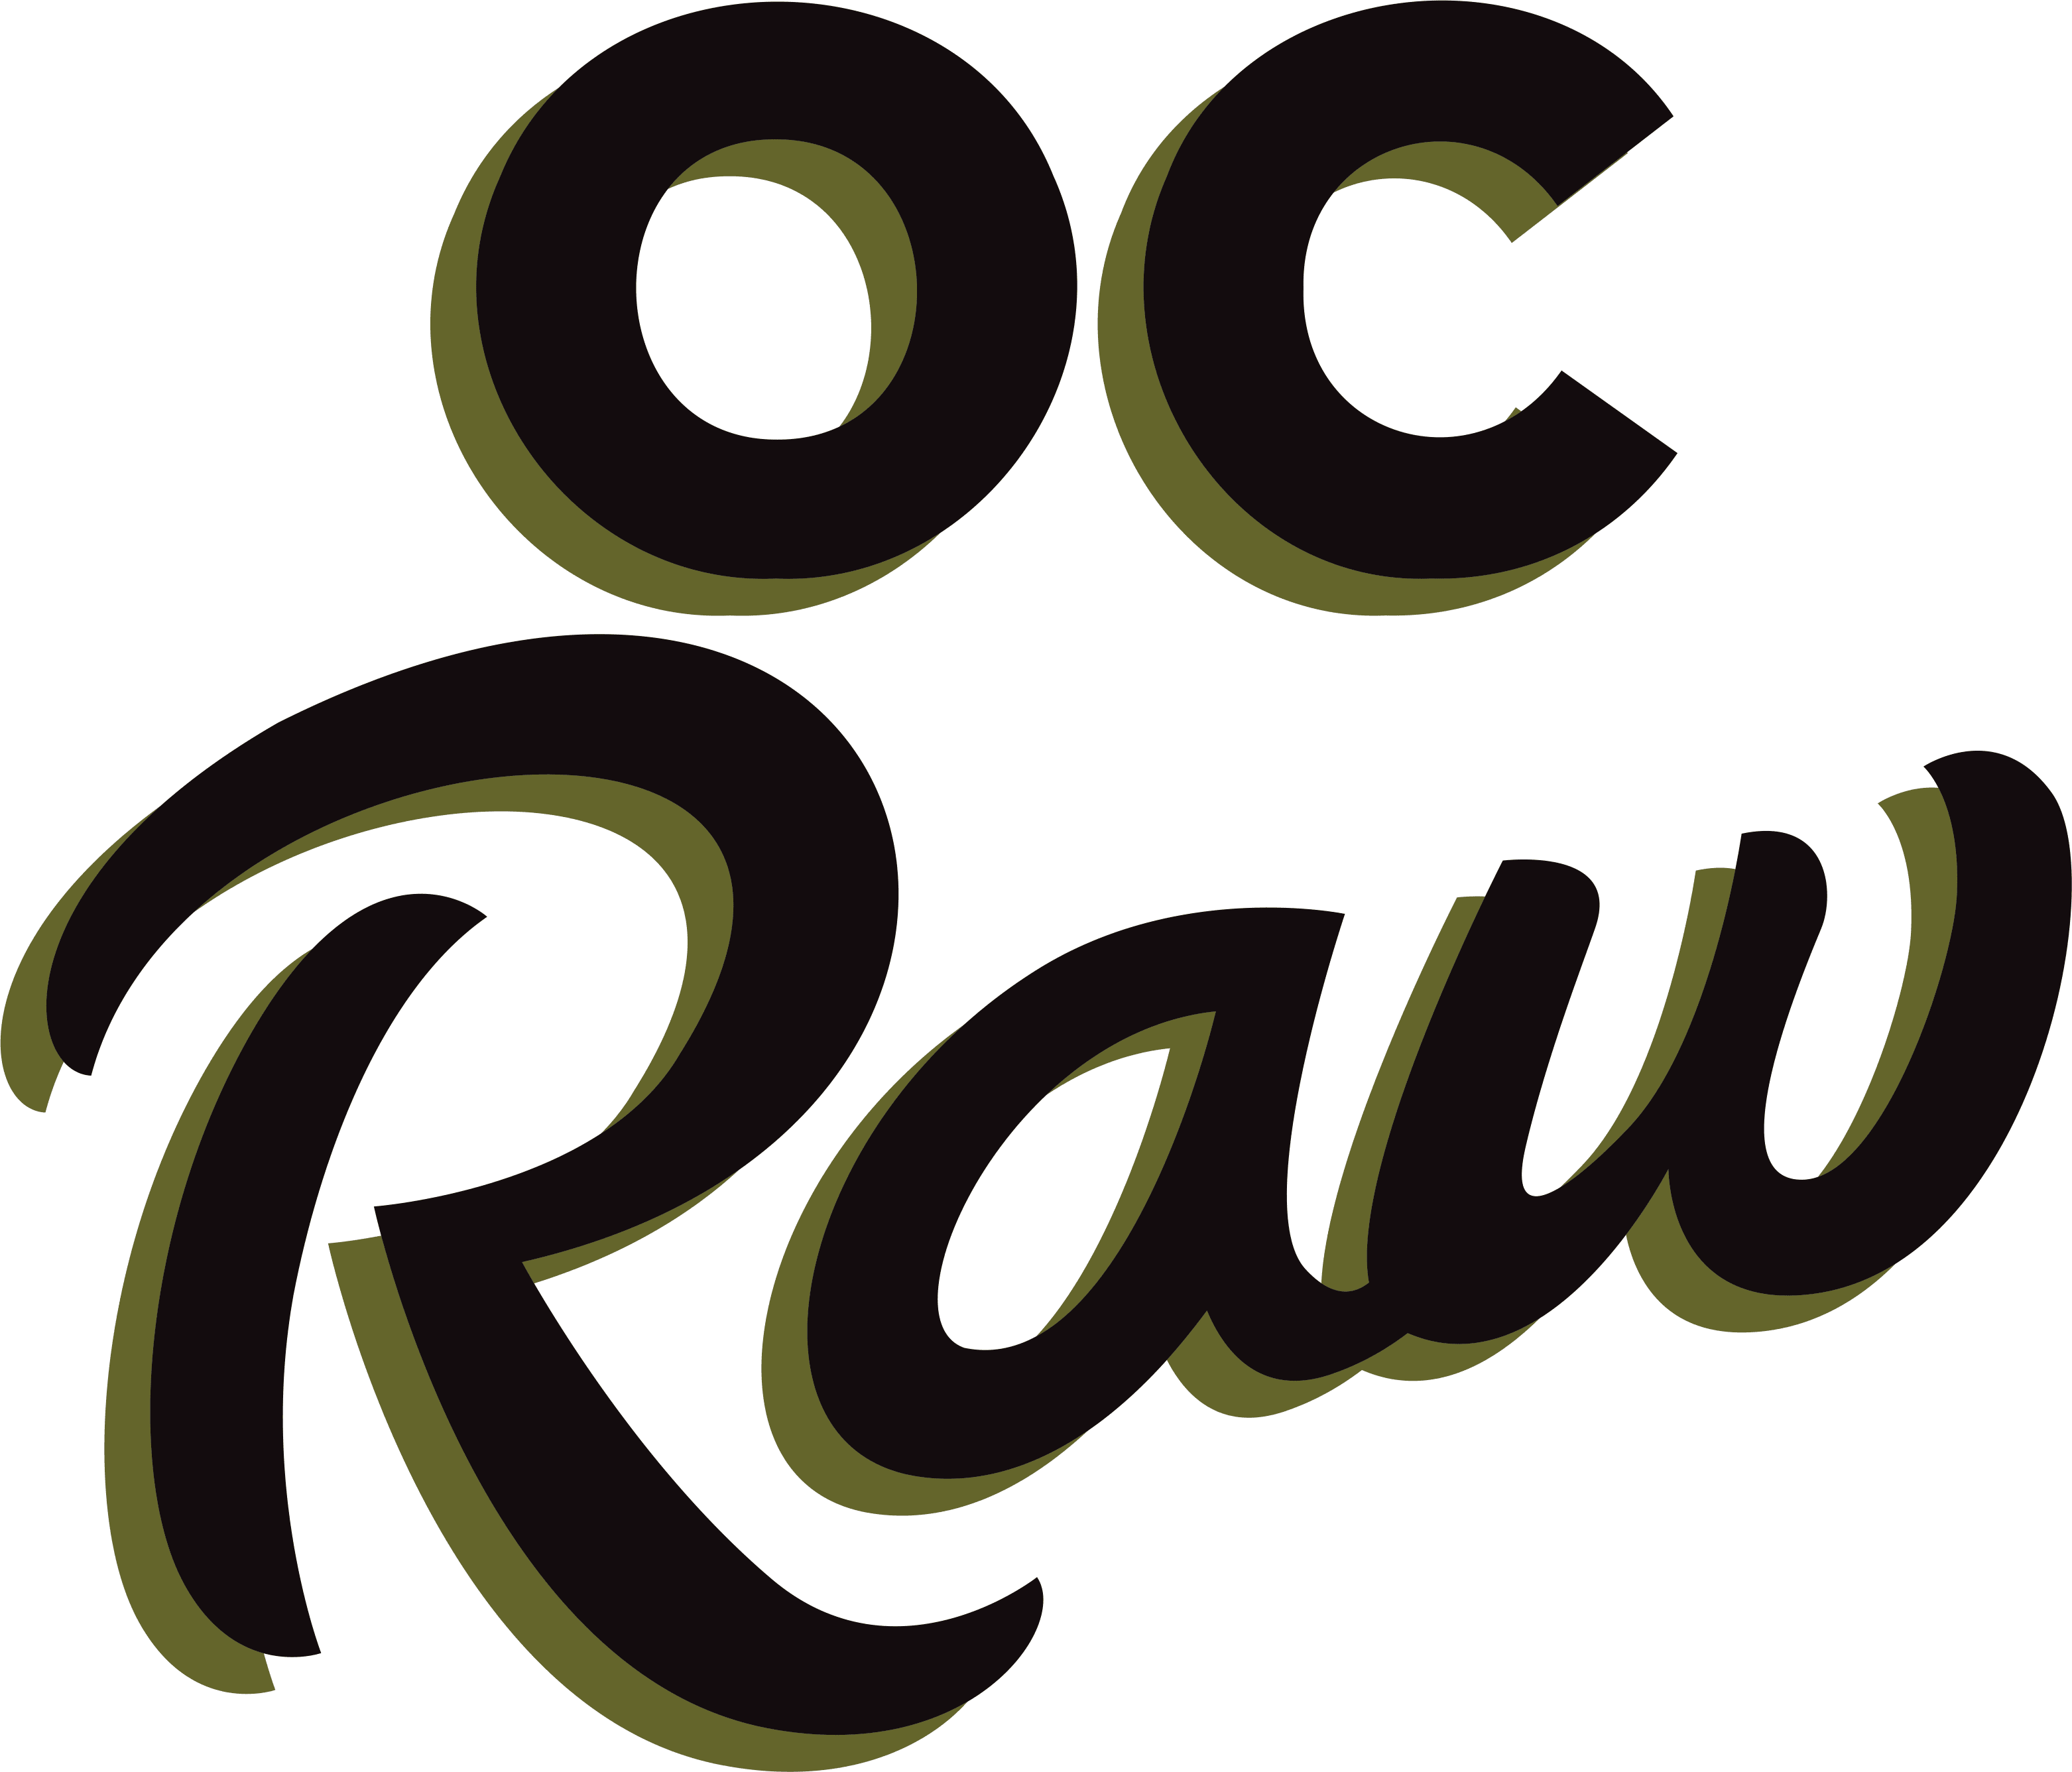 A green background with the word oc raw written in black.